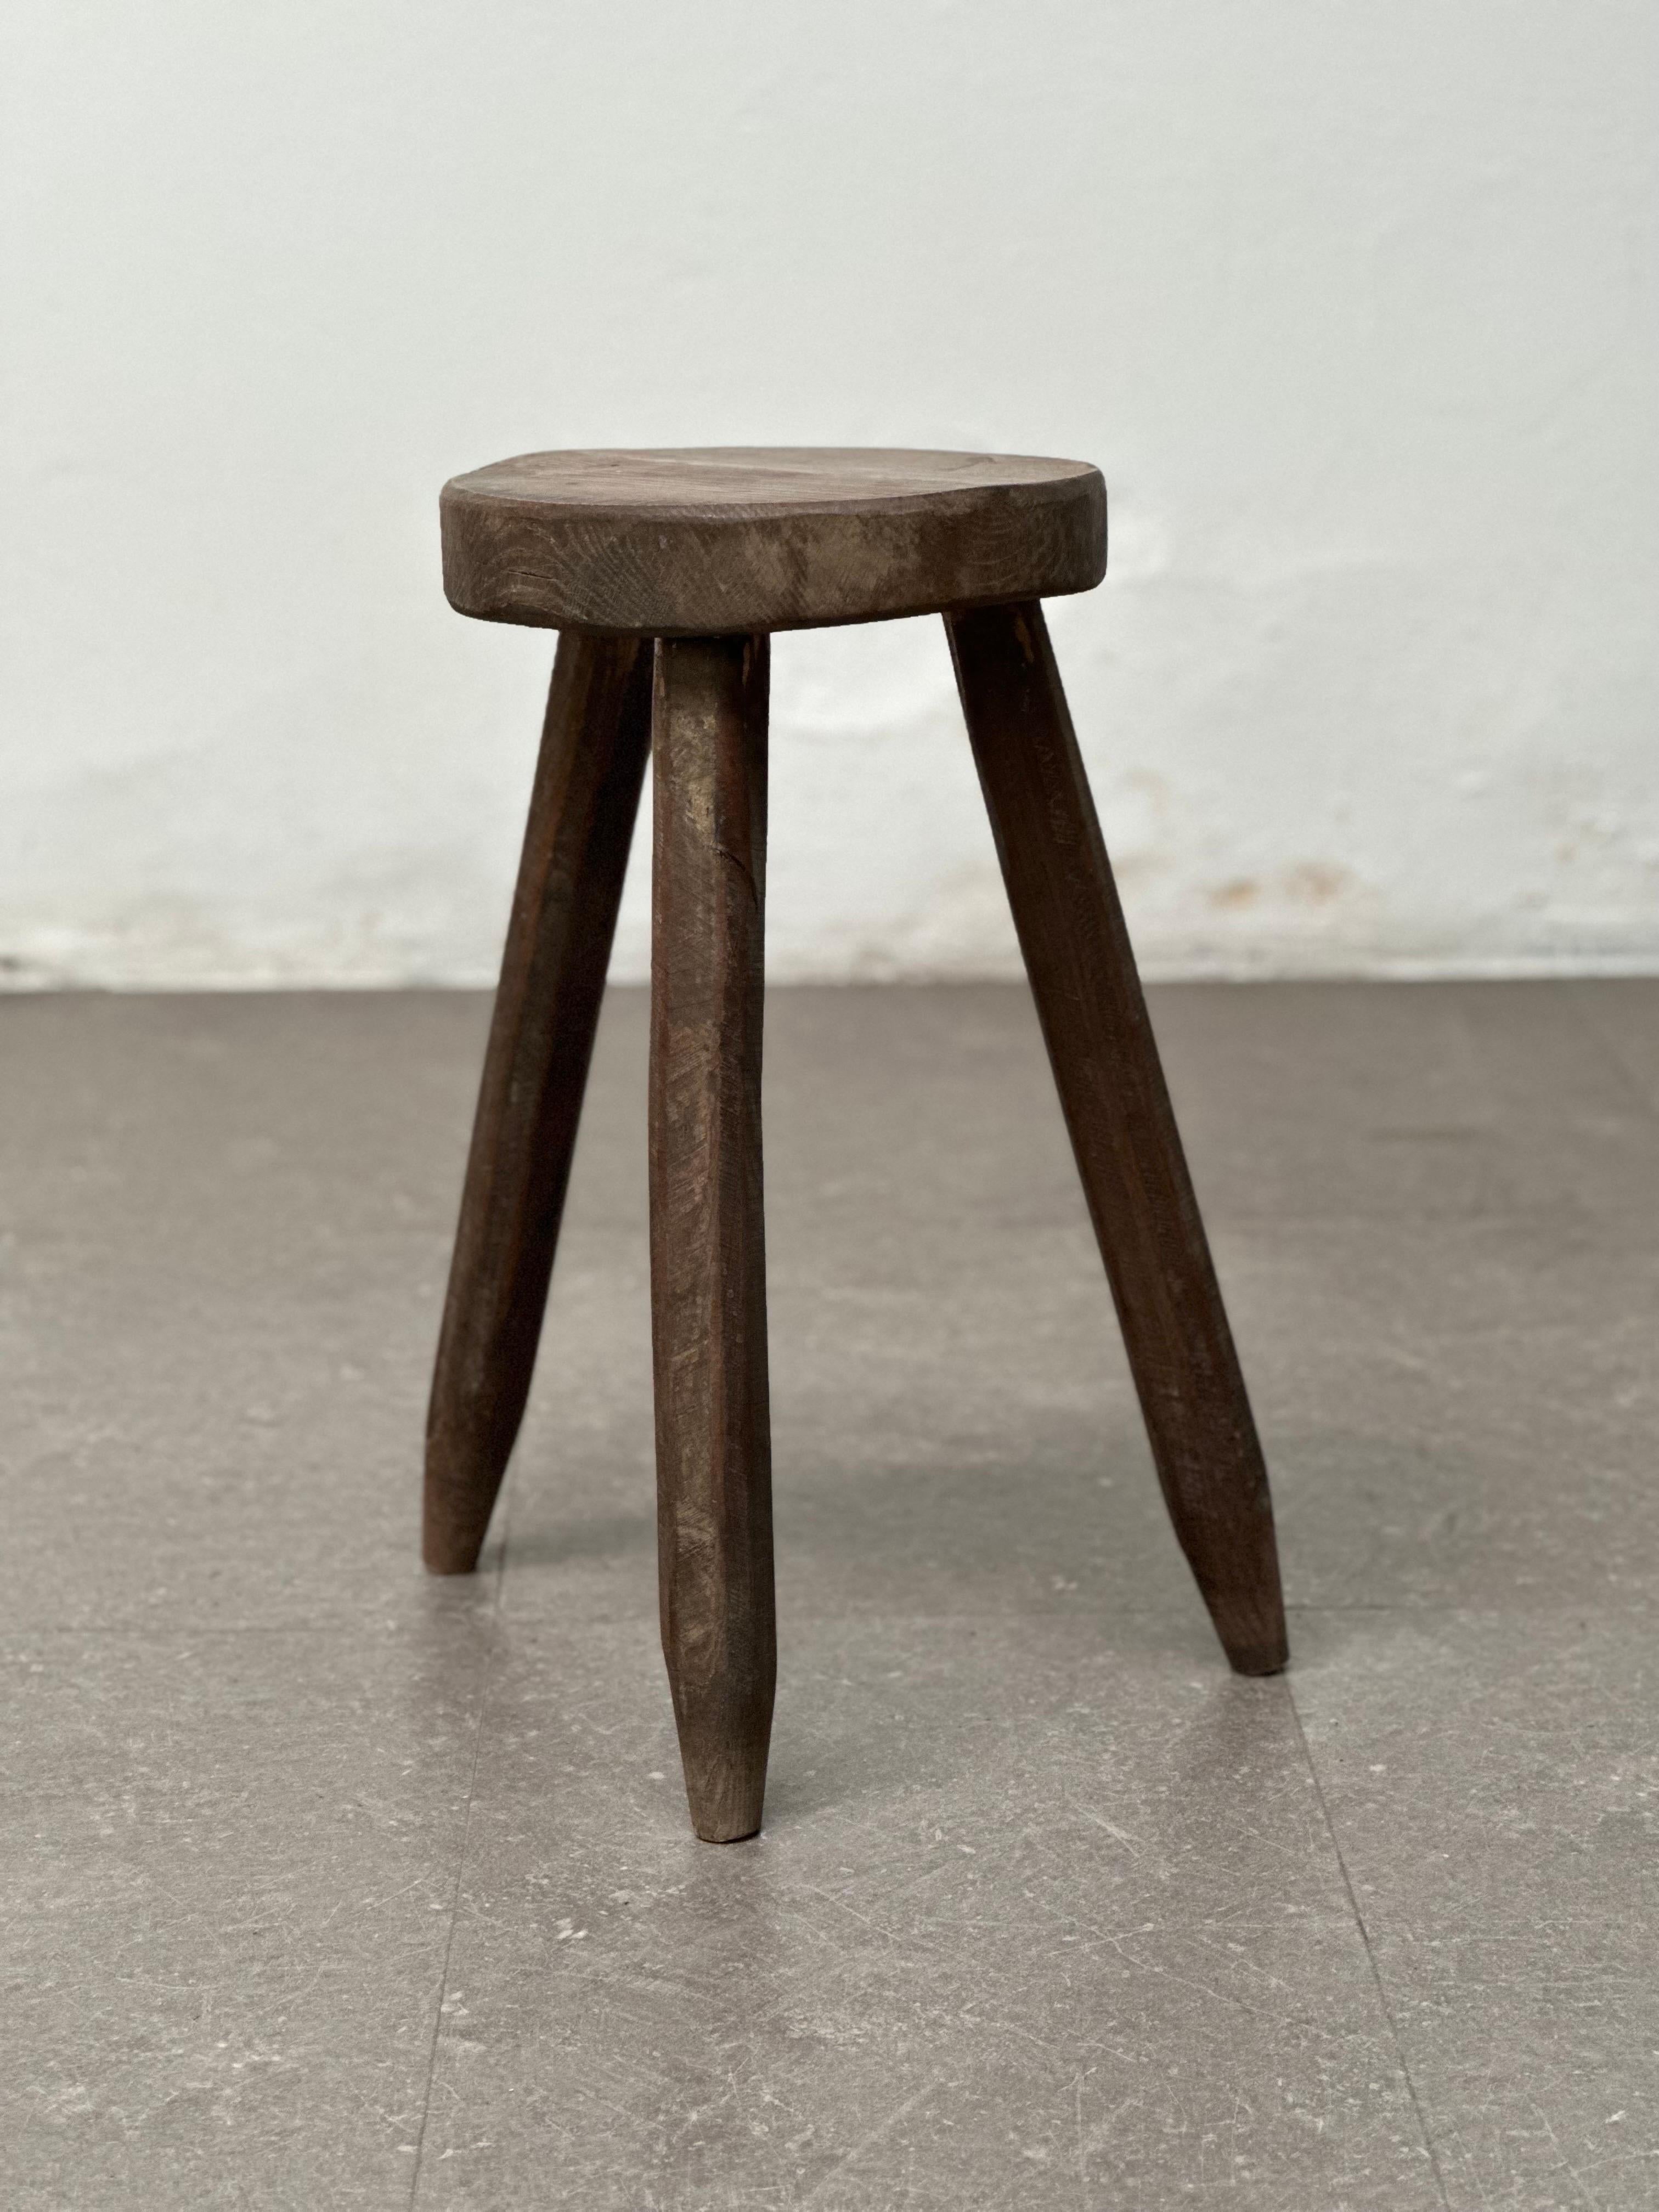 Mid-Century Modern French Brutalist Tripod Stool, 1960s - Embrace the Charm of Primitive Elegance For Sale